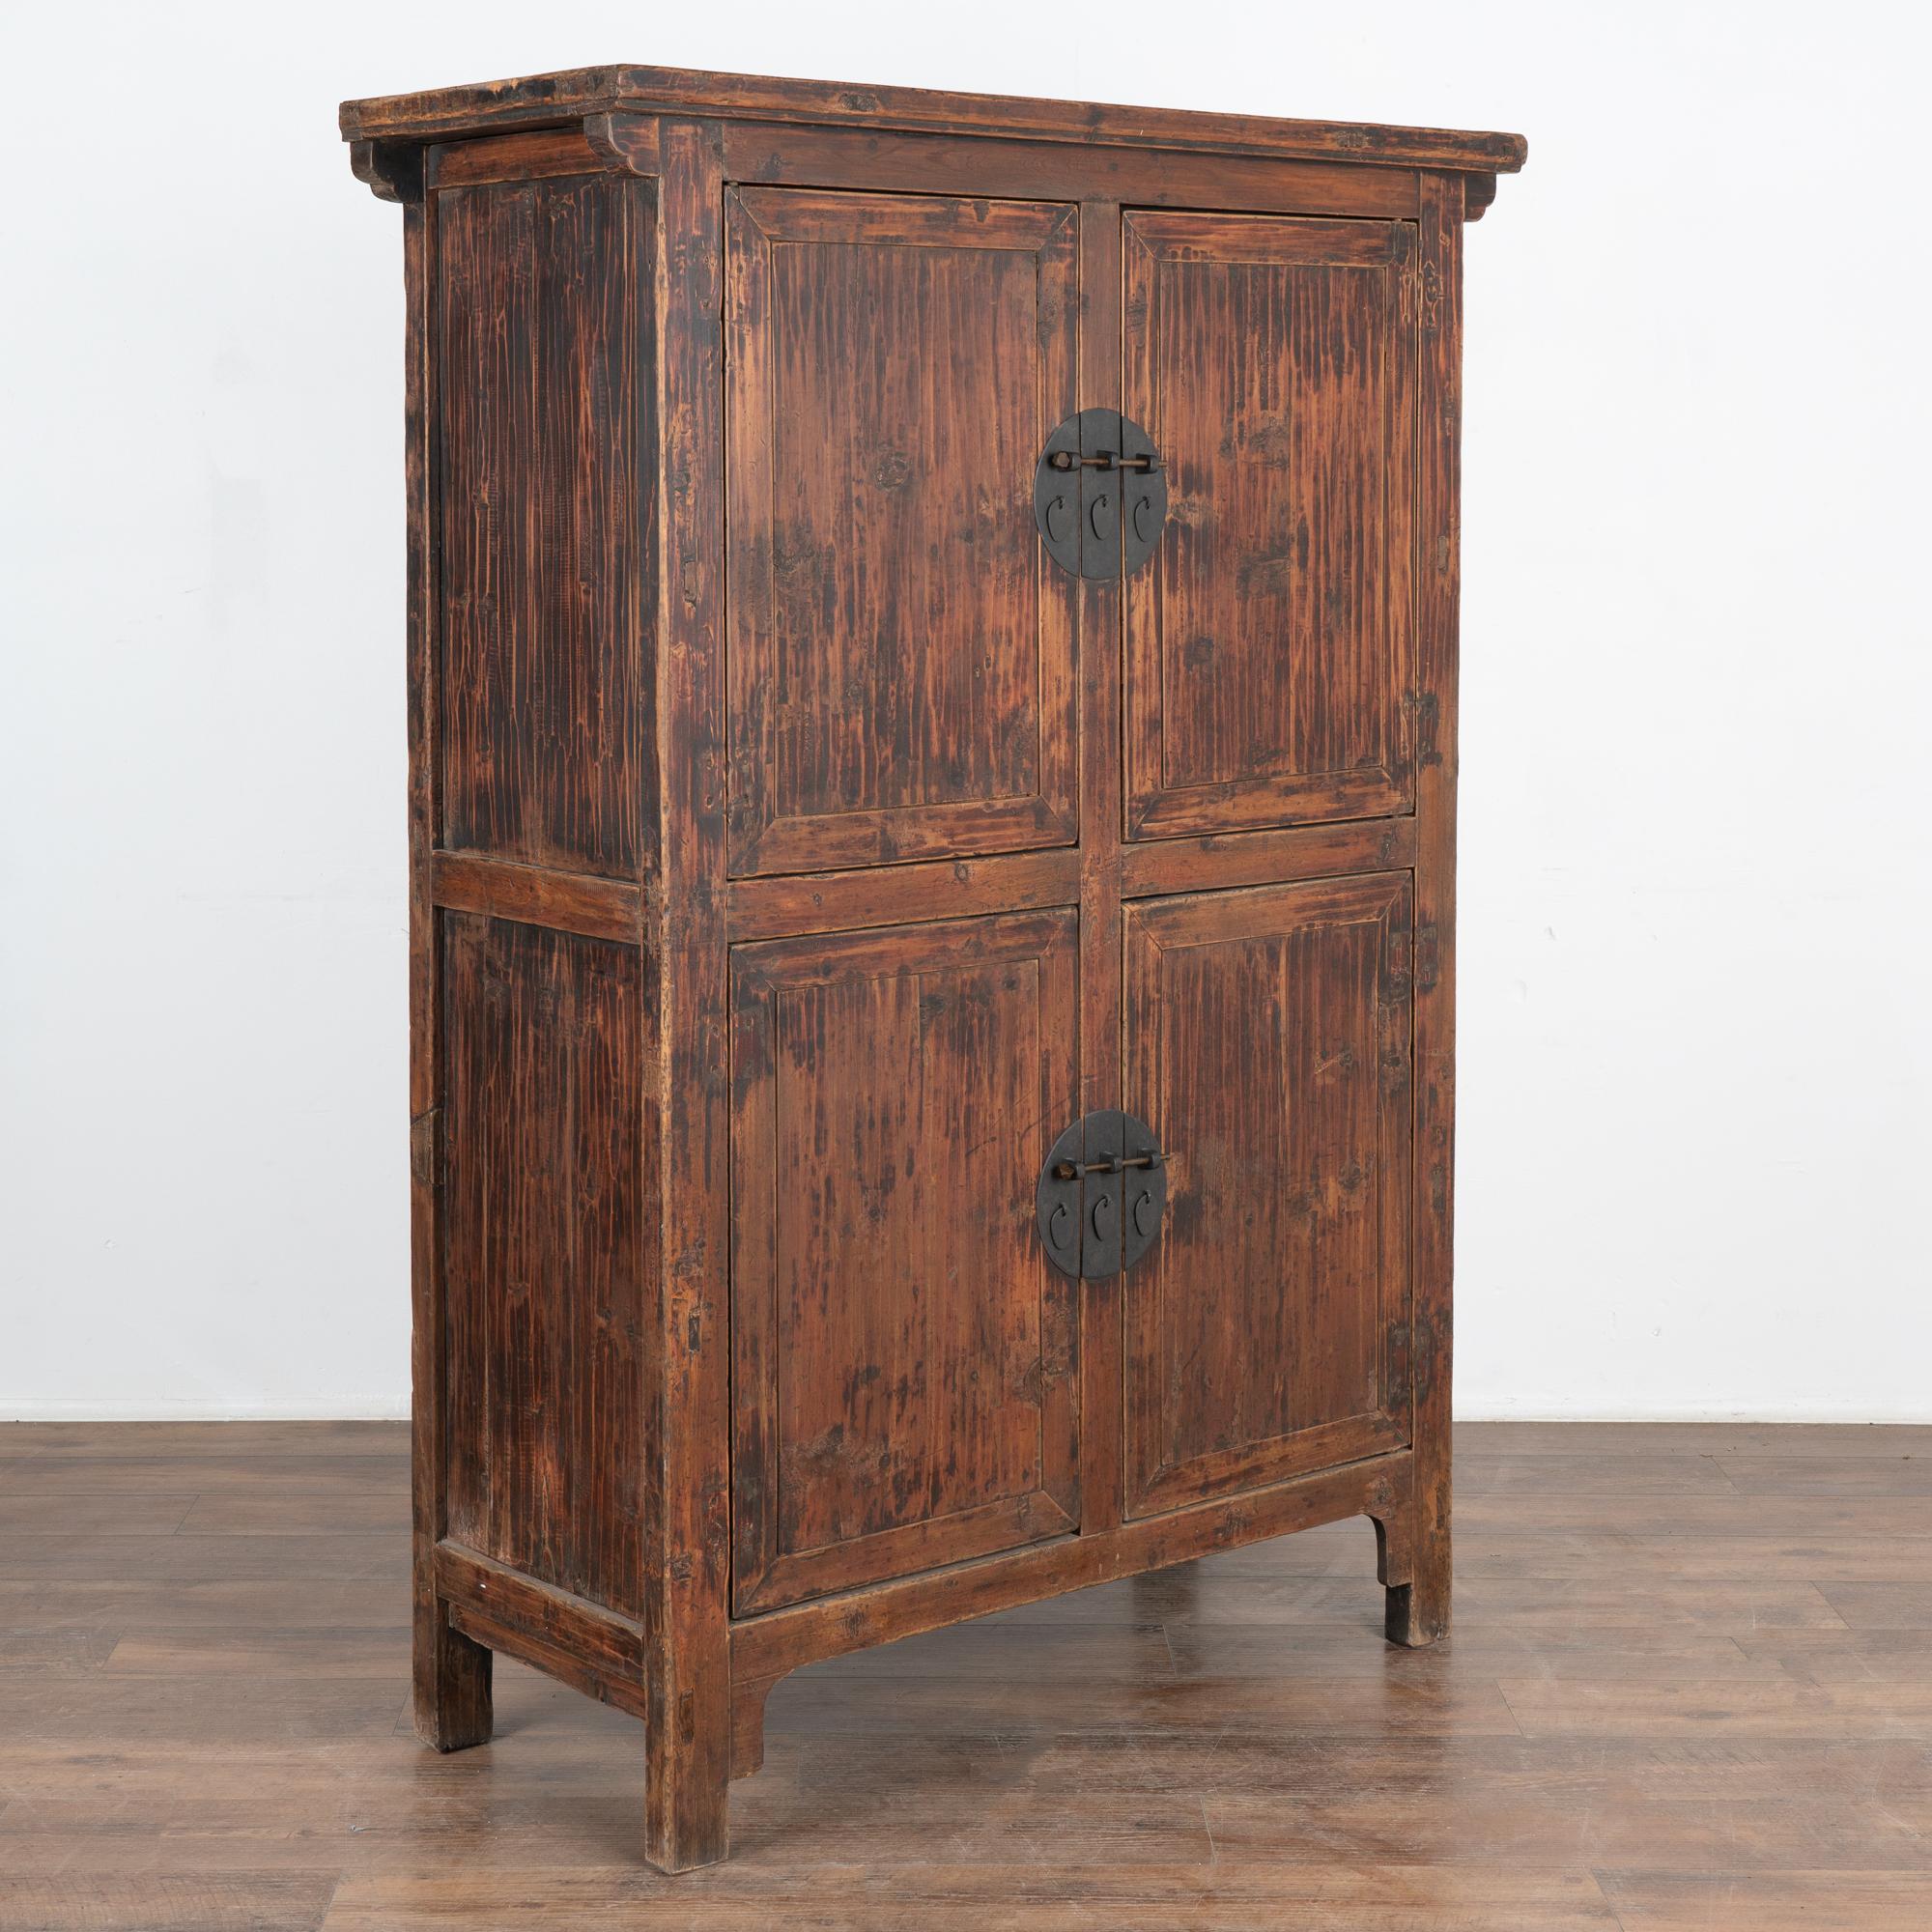 The superb quality of this Chinese cabinet is largely due to the exceptional finish. The old brown painted finish has slight red undertones and is accentuated by a hand buffed finish, leaving a warm organic feel to this armoire.
Restored (new